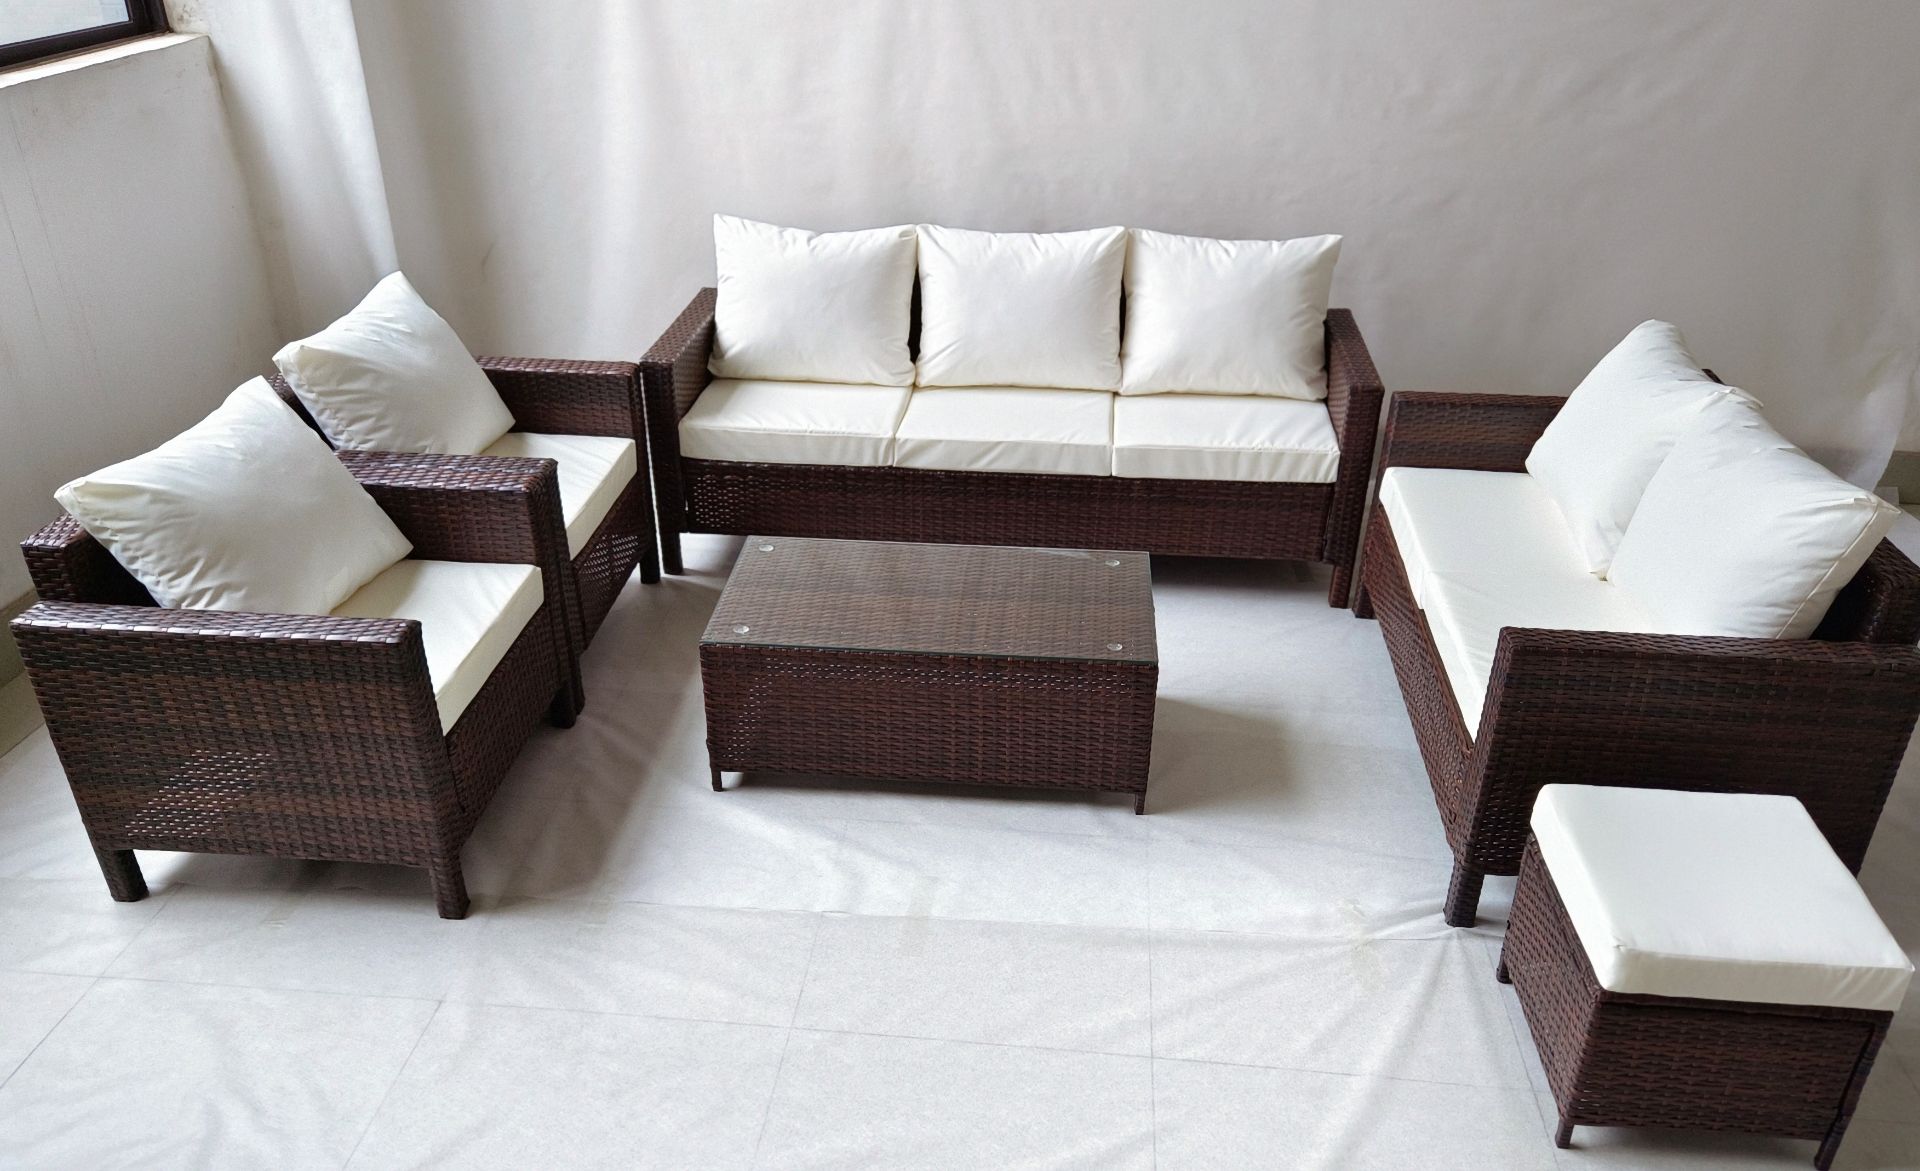 FREE DELIVERY - 8-SEATER RATTAN CHAIR & SOFA GARDEN FURNITURE SET - BROWN